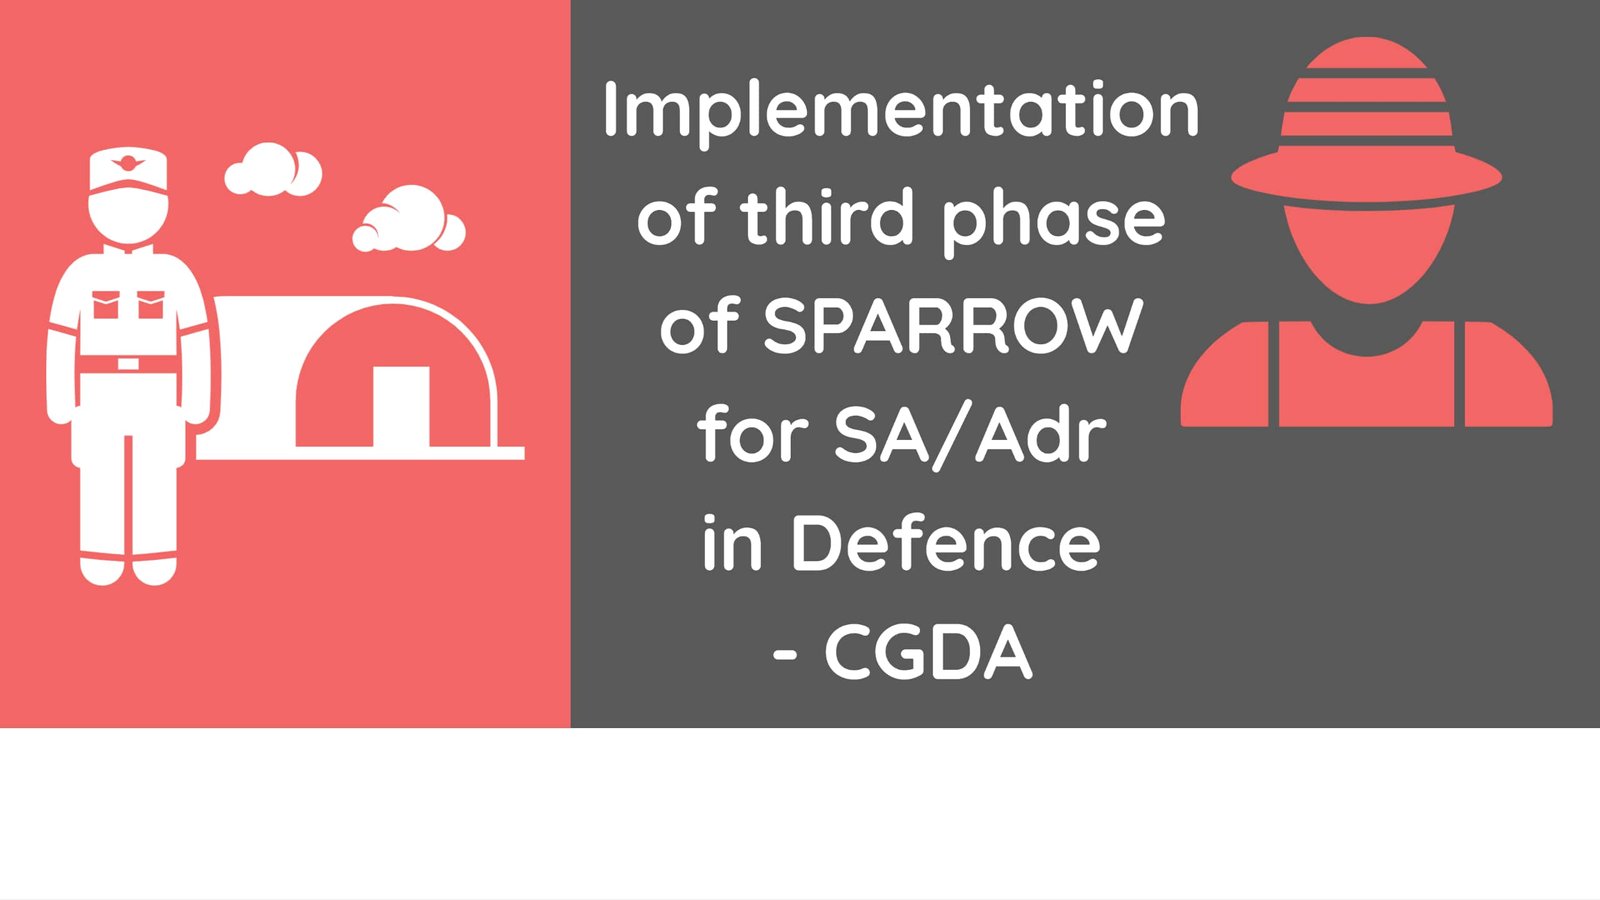 Implementation of third phase of SPARROW for SA_Adr in Defence - CGDA